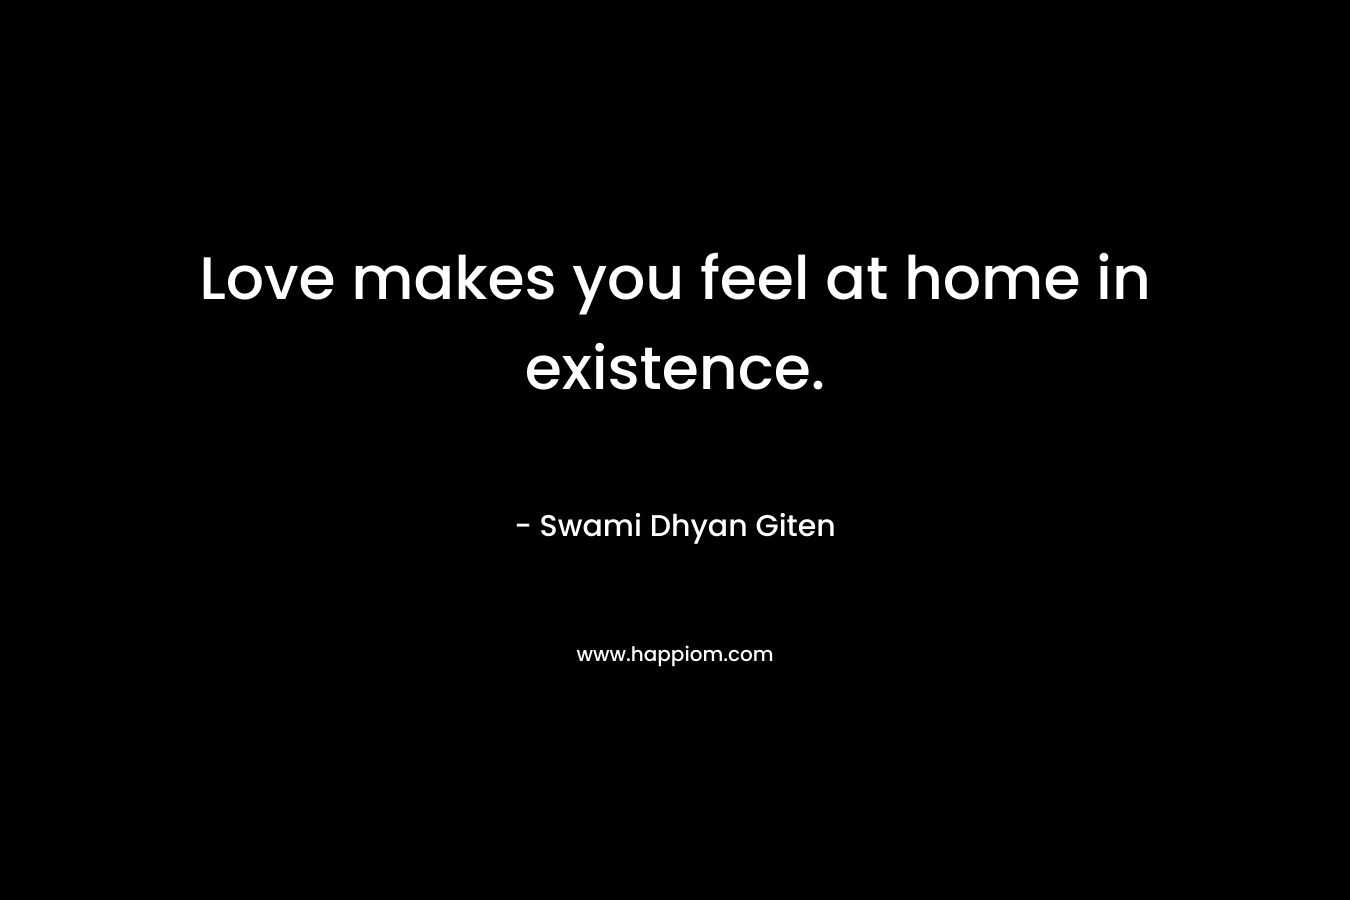 Love makes you feel at home in existence.